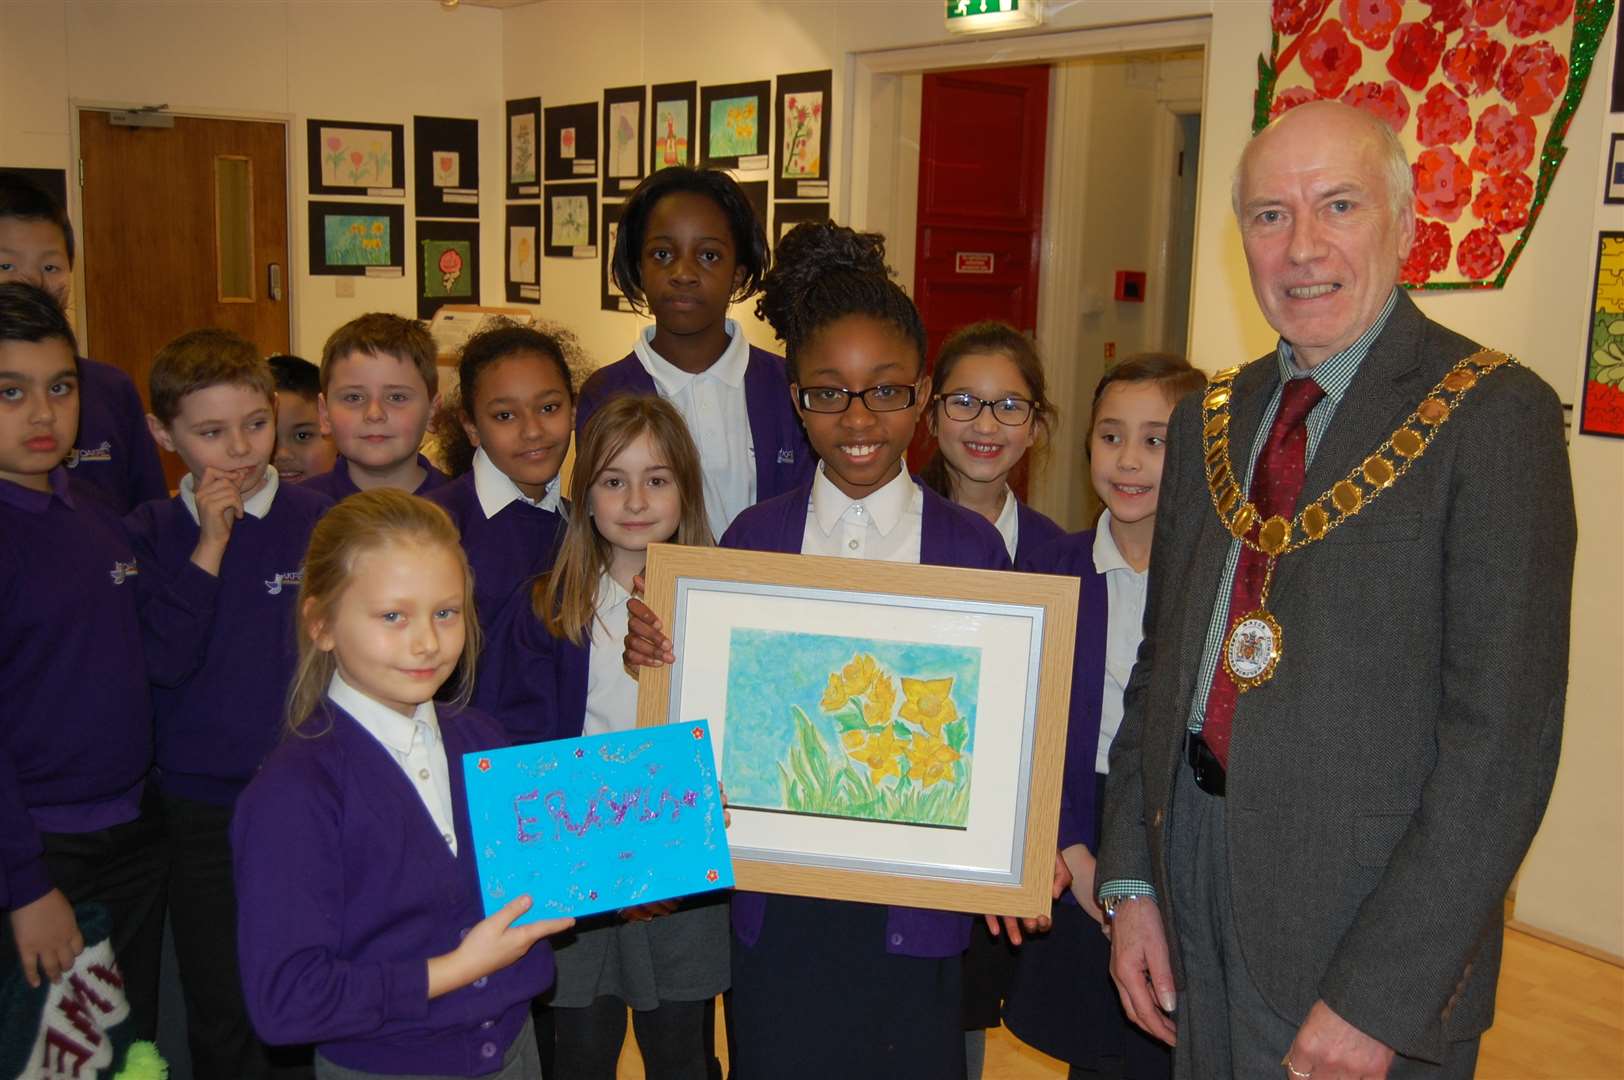 Mayor of Dartford Ian Armitt is presented with a piece of artwork for his office.